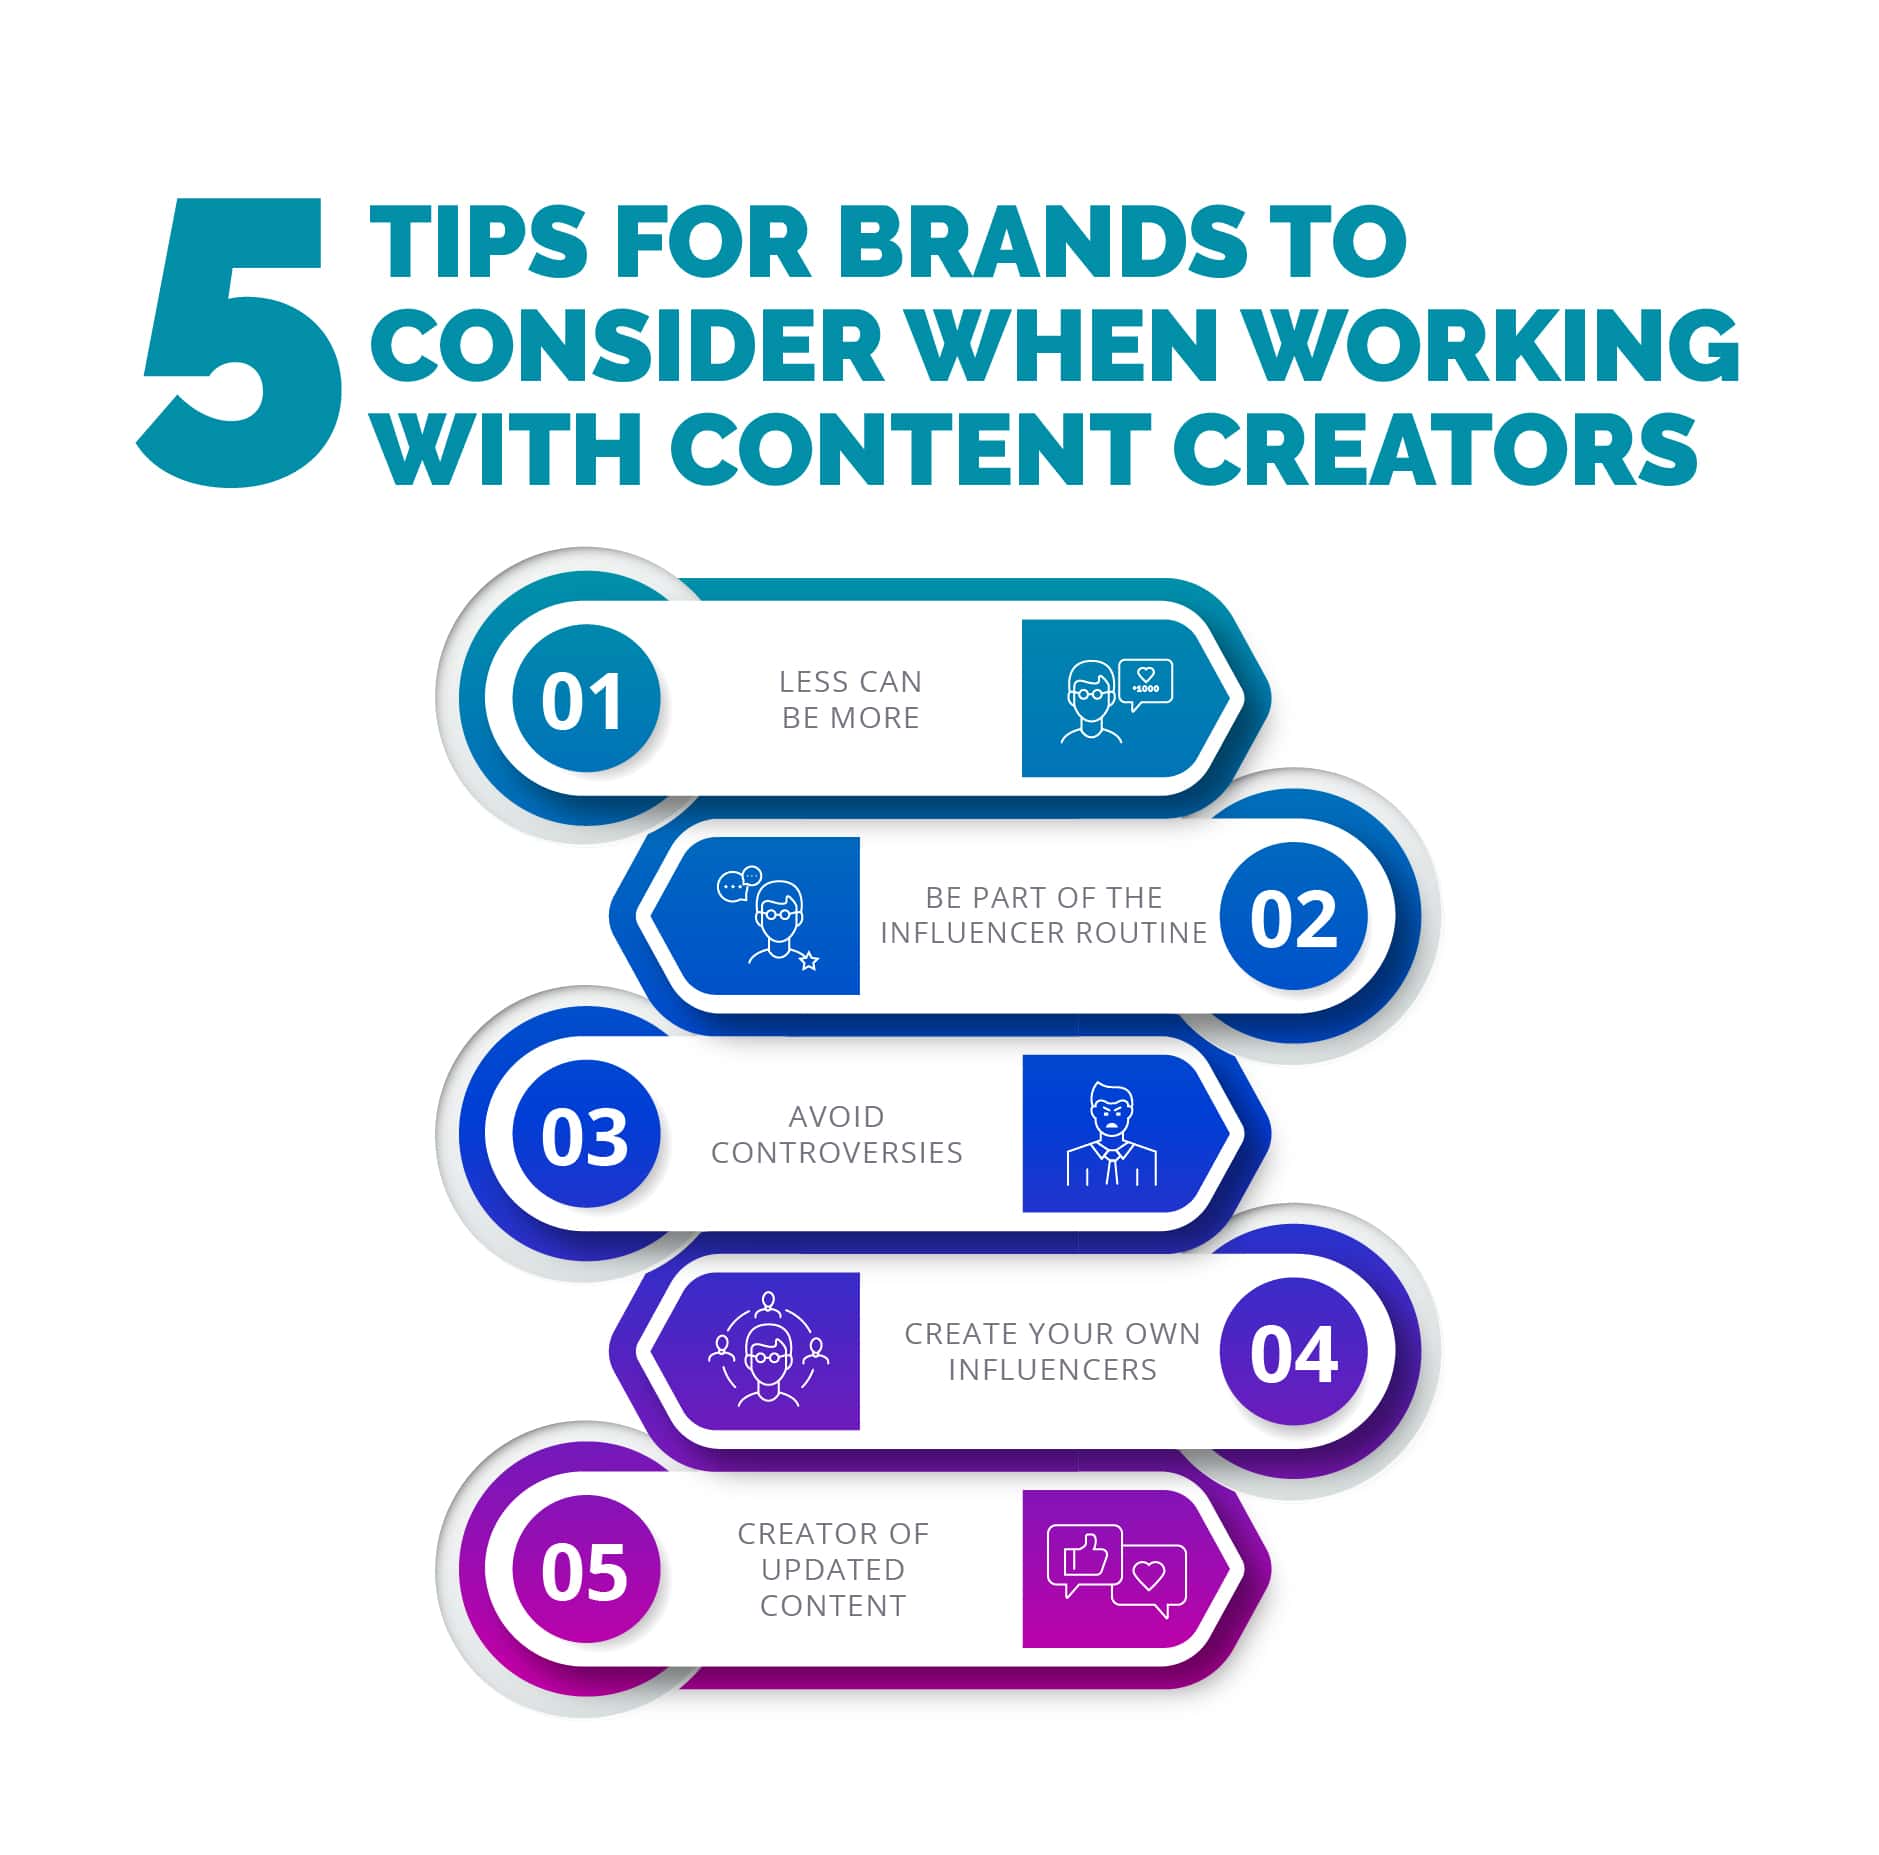 Tips for brands to consider when working with content creators